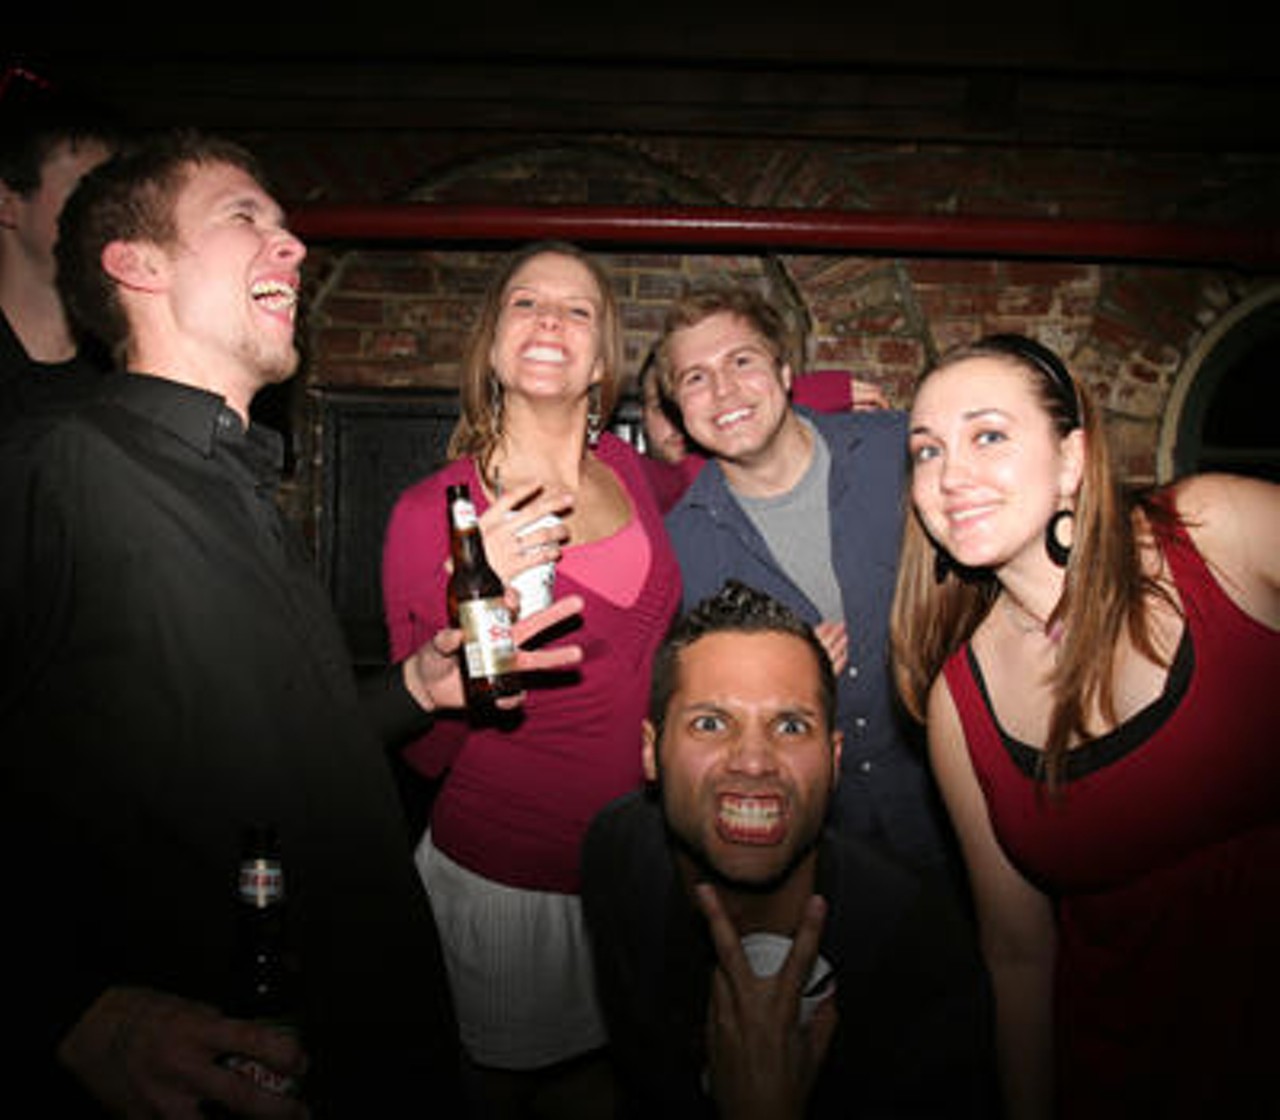 On Valentine's Day, these people partied without pity at the Stable. "London Calling" at the Stable.